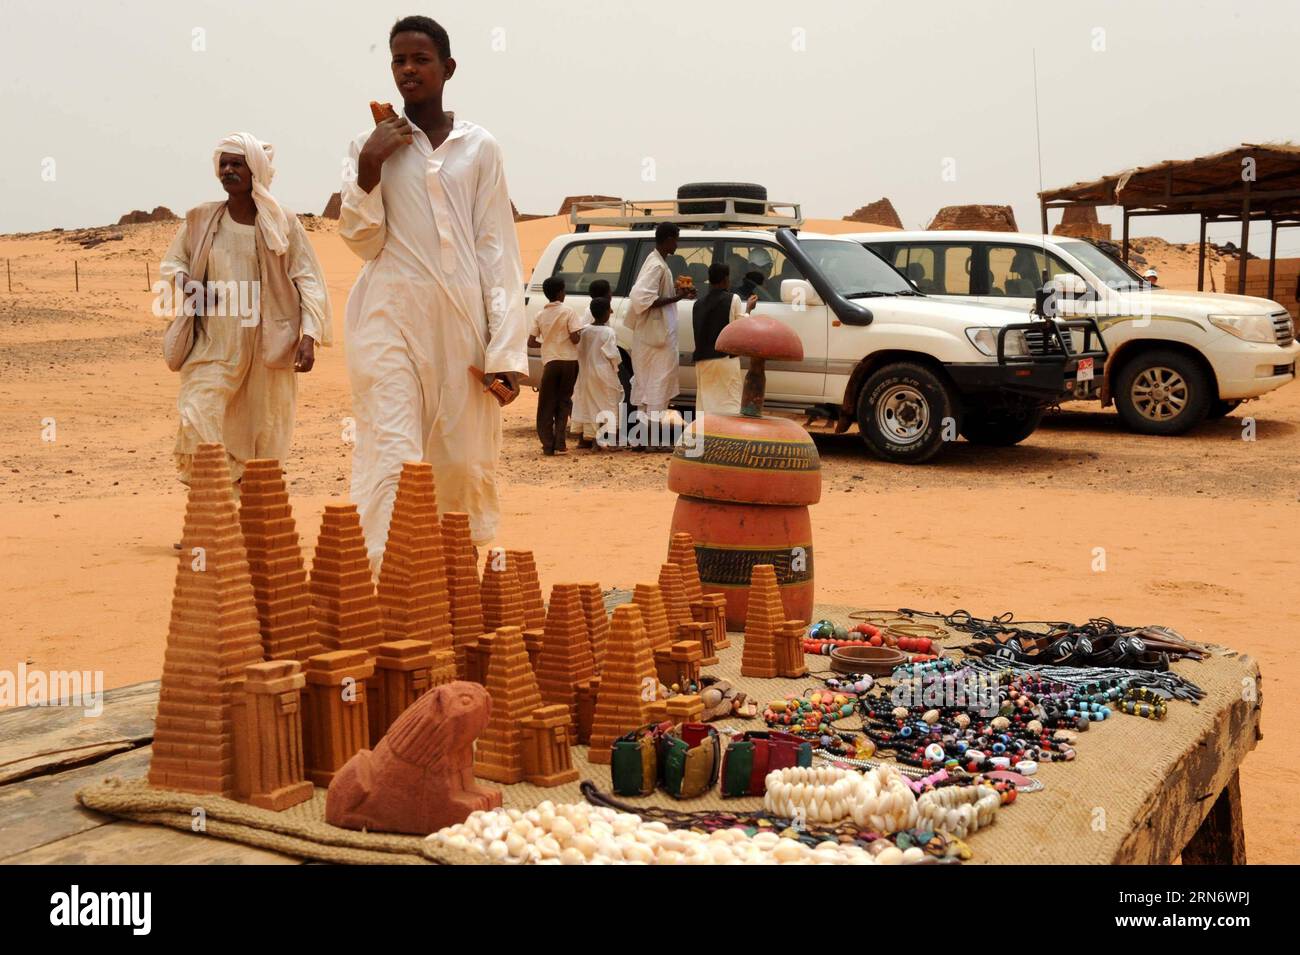 Pyramiden von Meroe in Sudan (150808) -- KHARTOUM, - Vendors sell souvenirs in Meroe, 250km north of Khartoum, capital of Sudan, on Aug.7, 2015. The Archaeological Sites of the Island of Meroe, a semi-desert landscape between the Nile and Atbara rivers, was the heartland of the Kingdom of Kush, a major power from the 8th century B.C. to the 4th century A.D. The property consists of the royal city of the Kushite kings at Meroe, near the River Nile, the nearby religious site of Naqa and Musawwarat es Sufra. )(bxq) SUDAN-KHARTOUM-MEROE PYRAMIDS LixZiheng PUBLICATIONxNOTxINxCHN   Pyramids from Mer Stock Photo